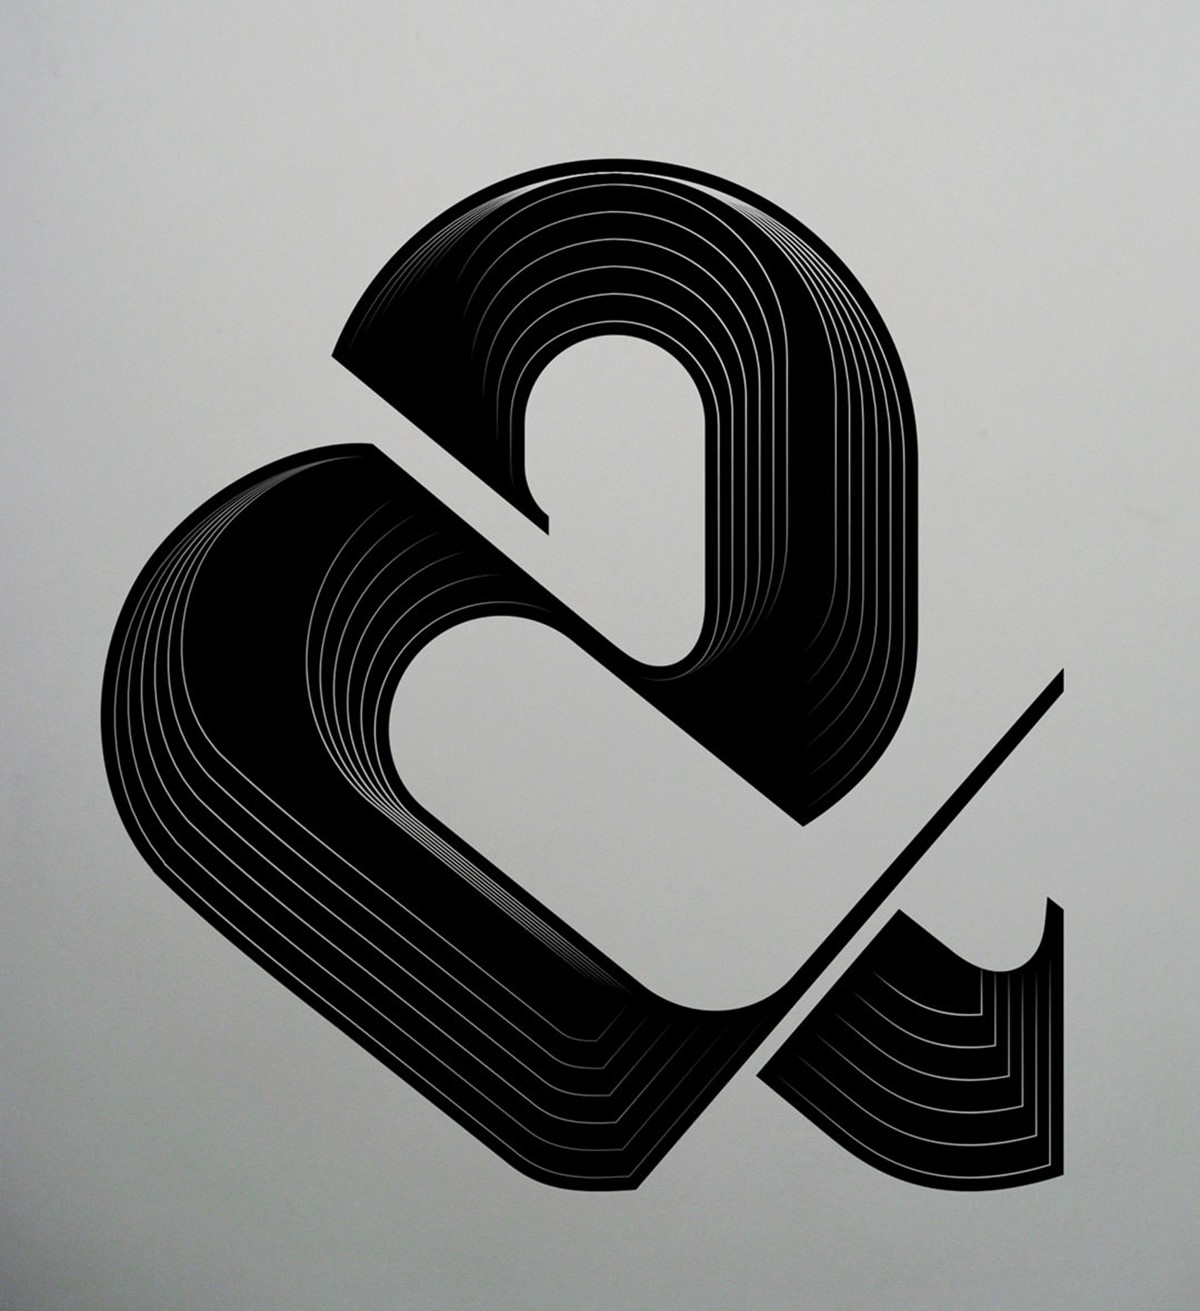 AIGA. Type Tuesday. BLT LTR Series. Typographic experiment: ampersand. Design by Superfried.